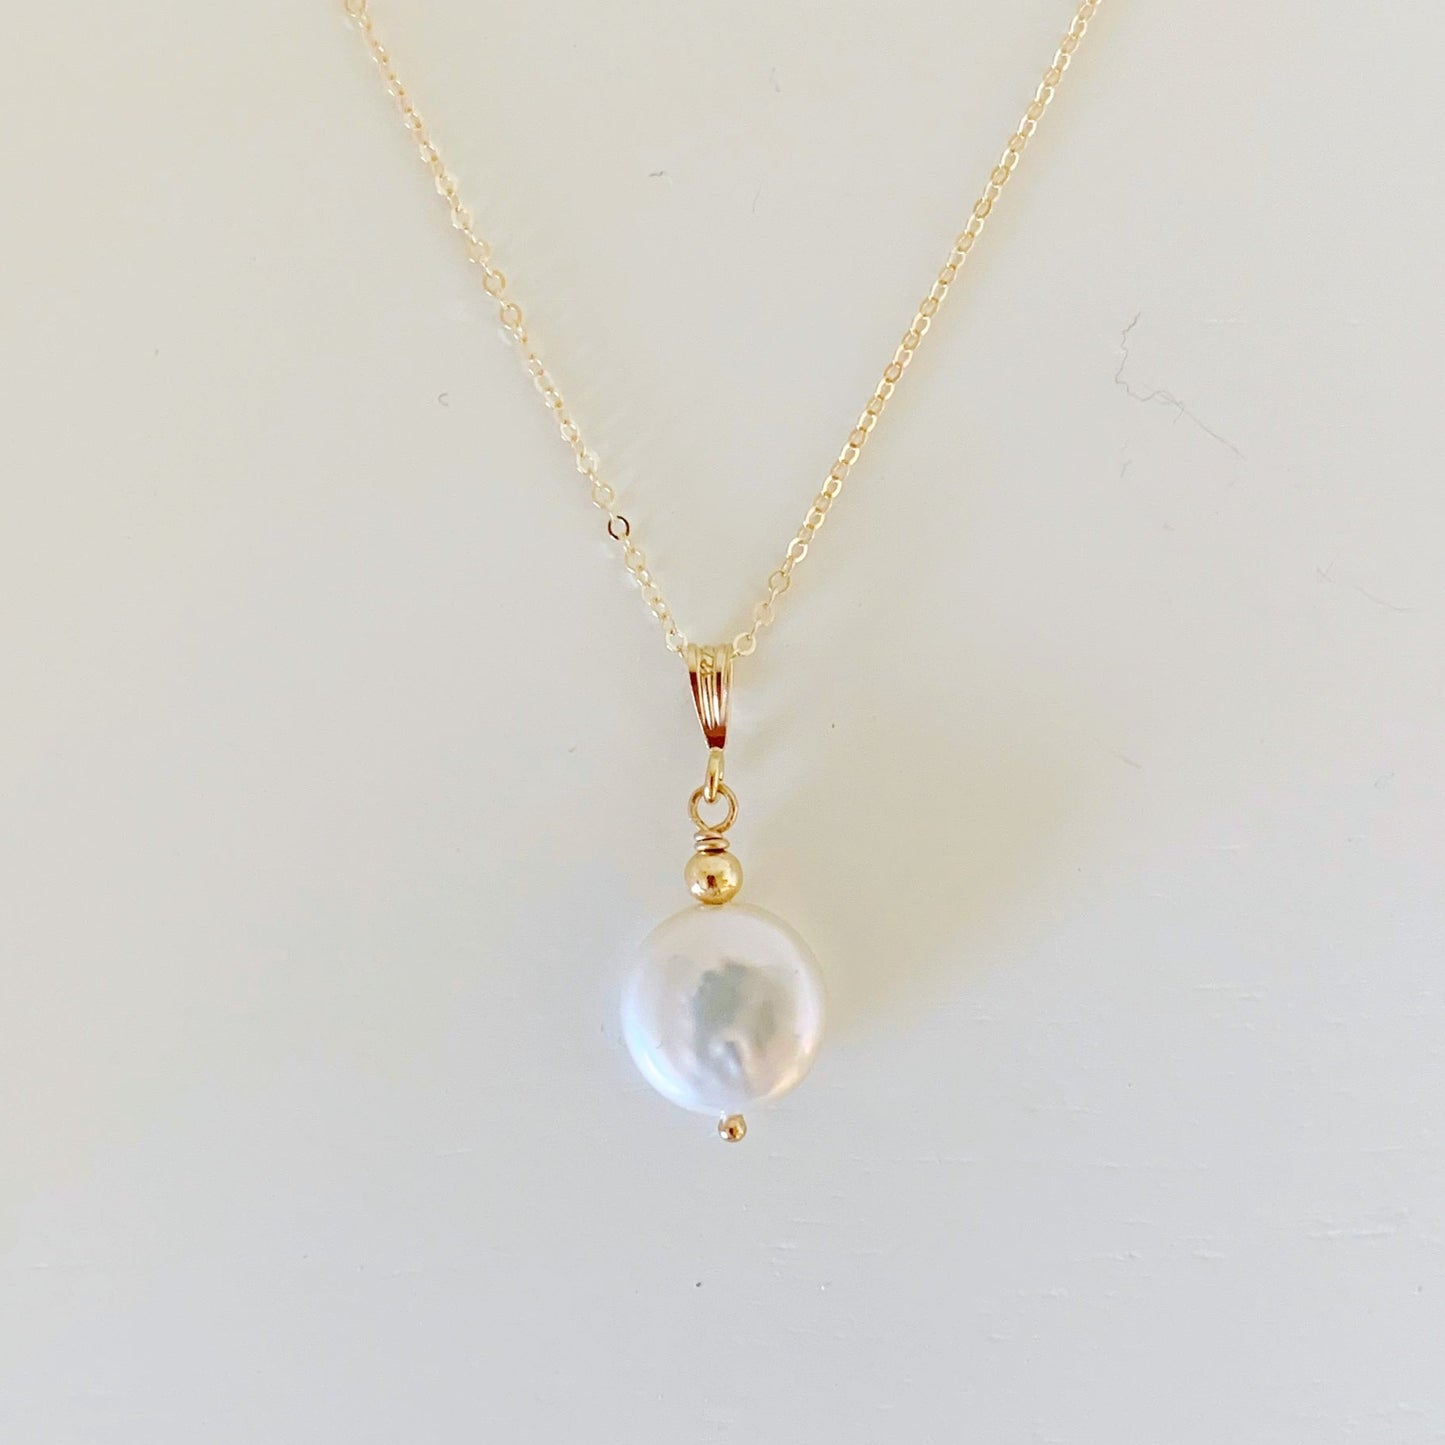 the newport necklace by mermaids and madeleines is a simple pendant style designed with a white freshwater coin pearl and 14k gold filled chain and findings